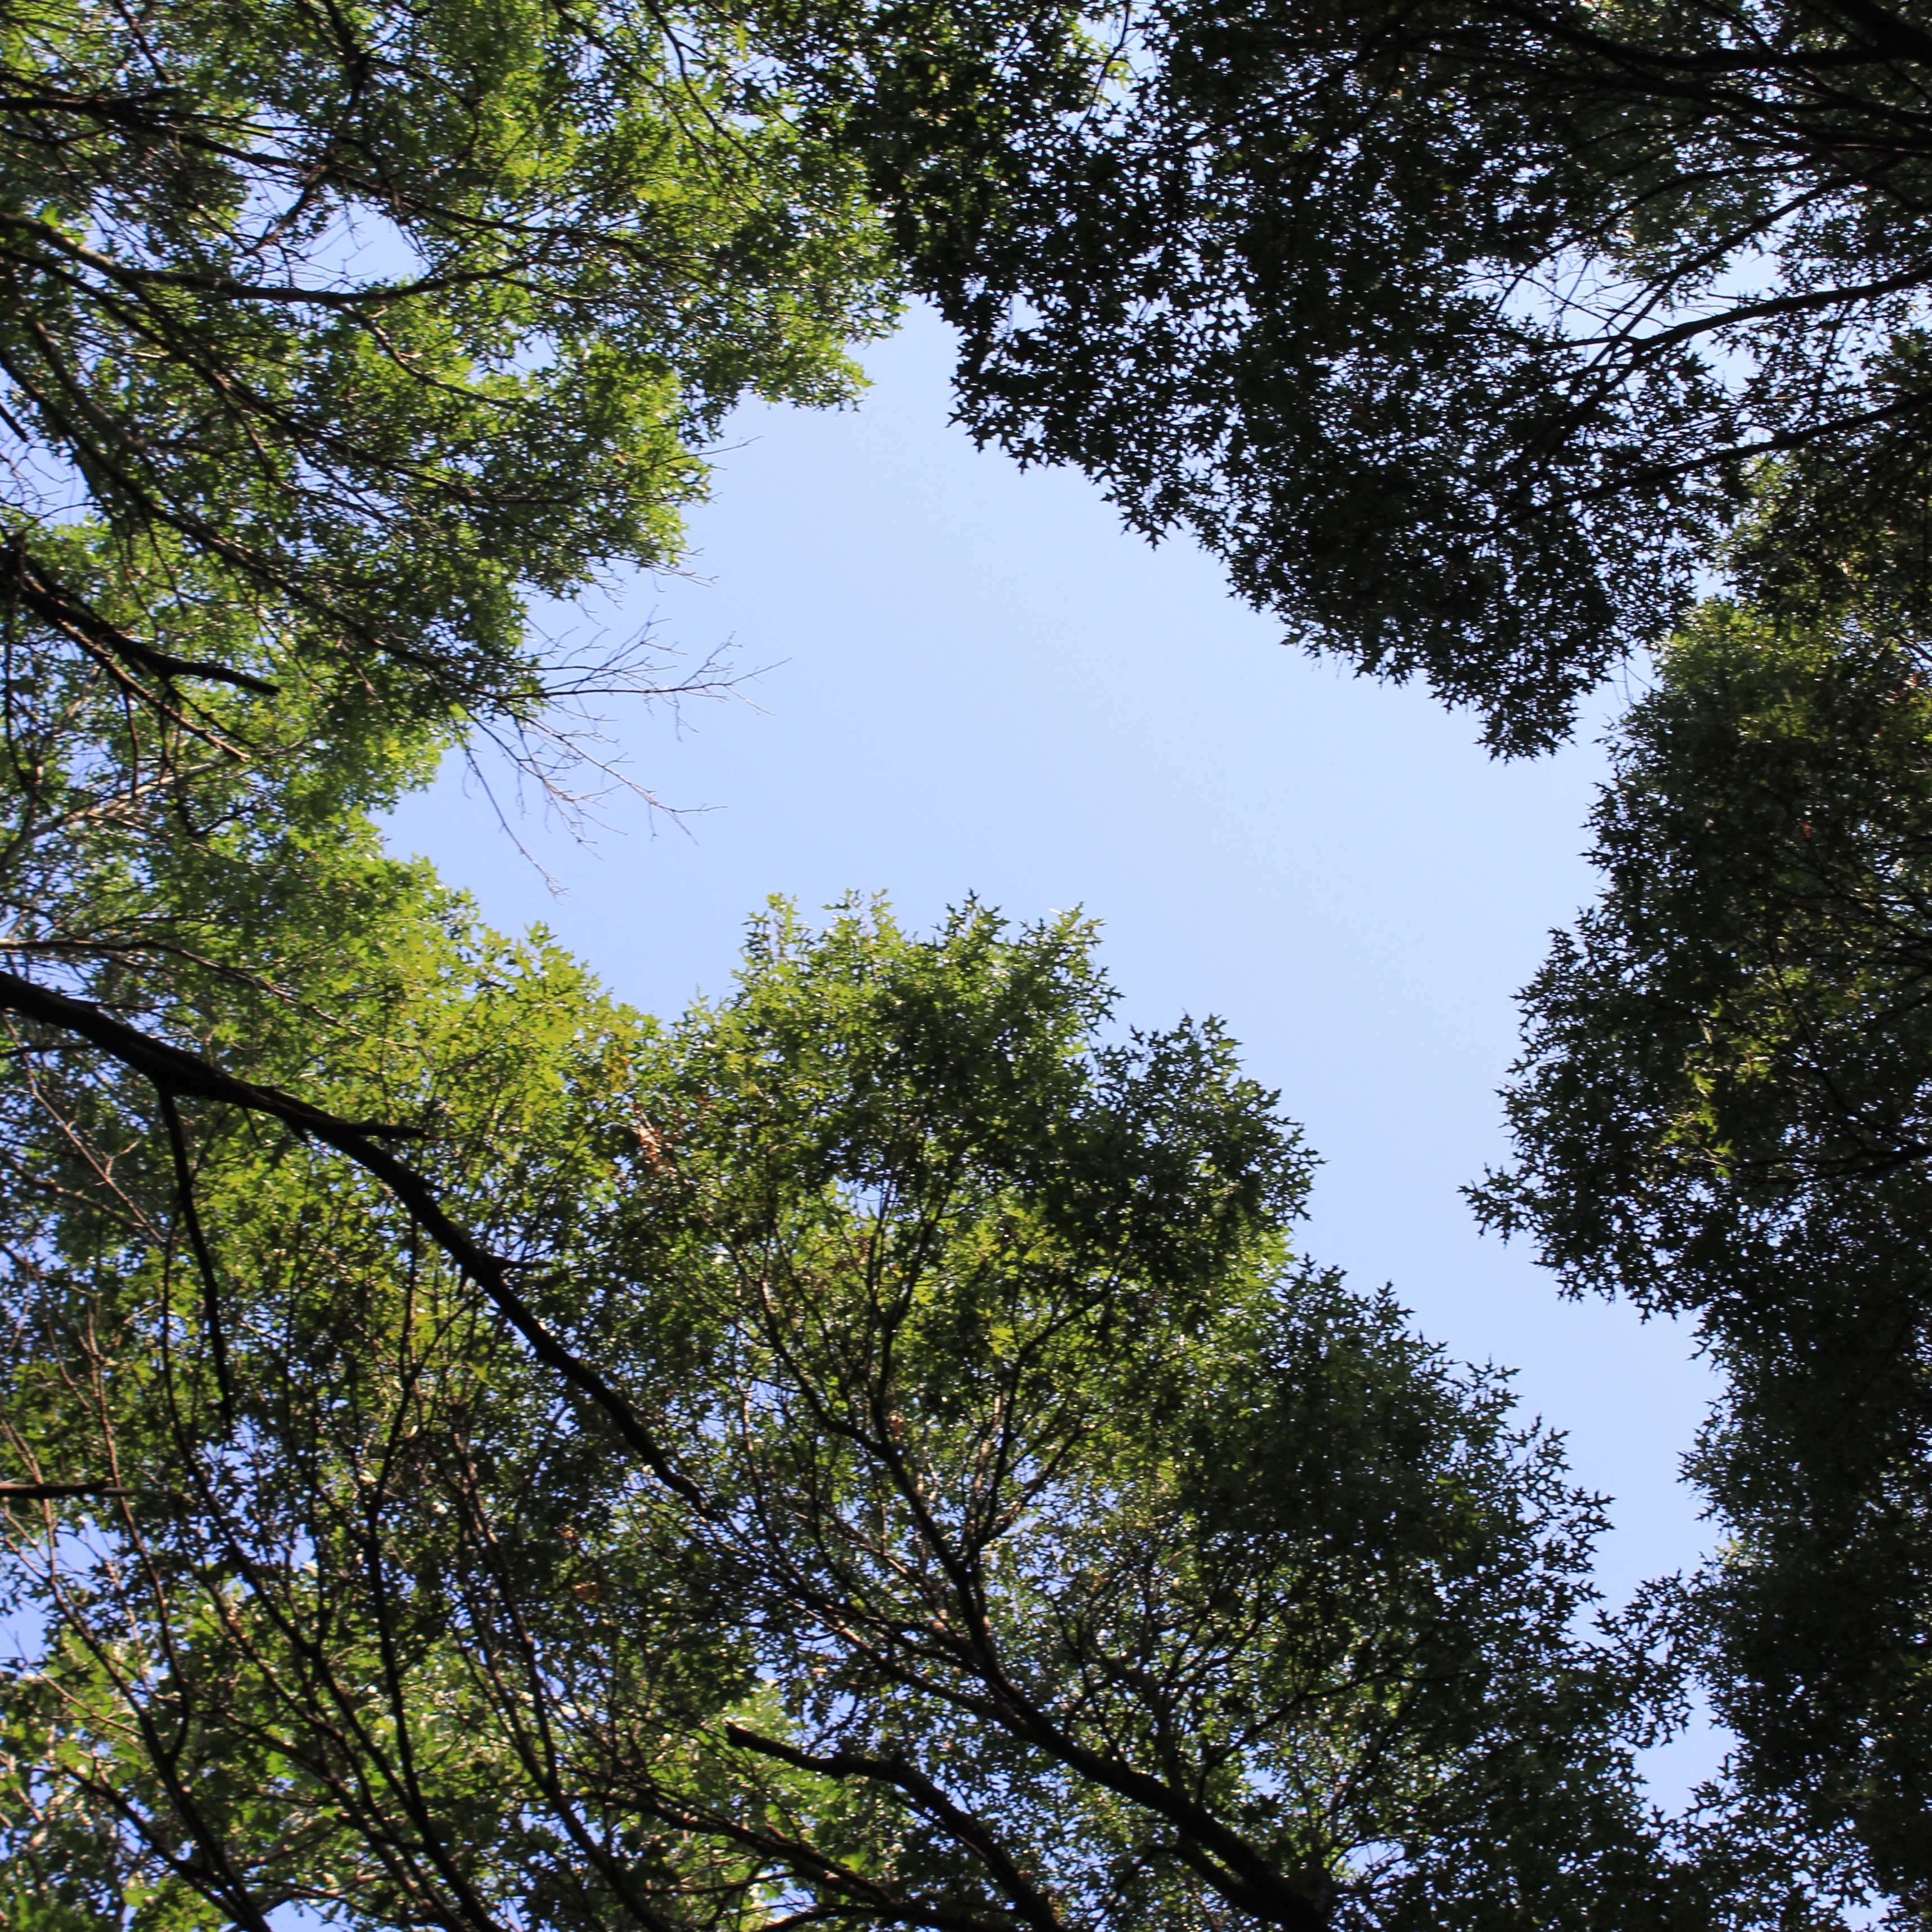 View of forest canopy from below